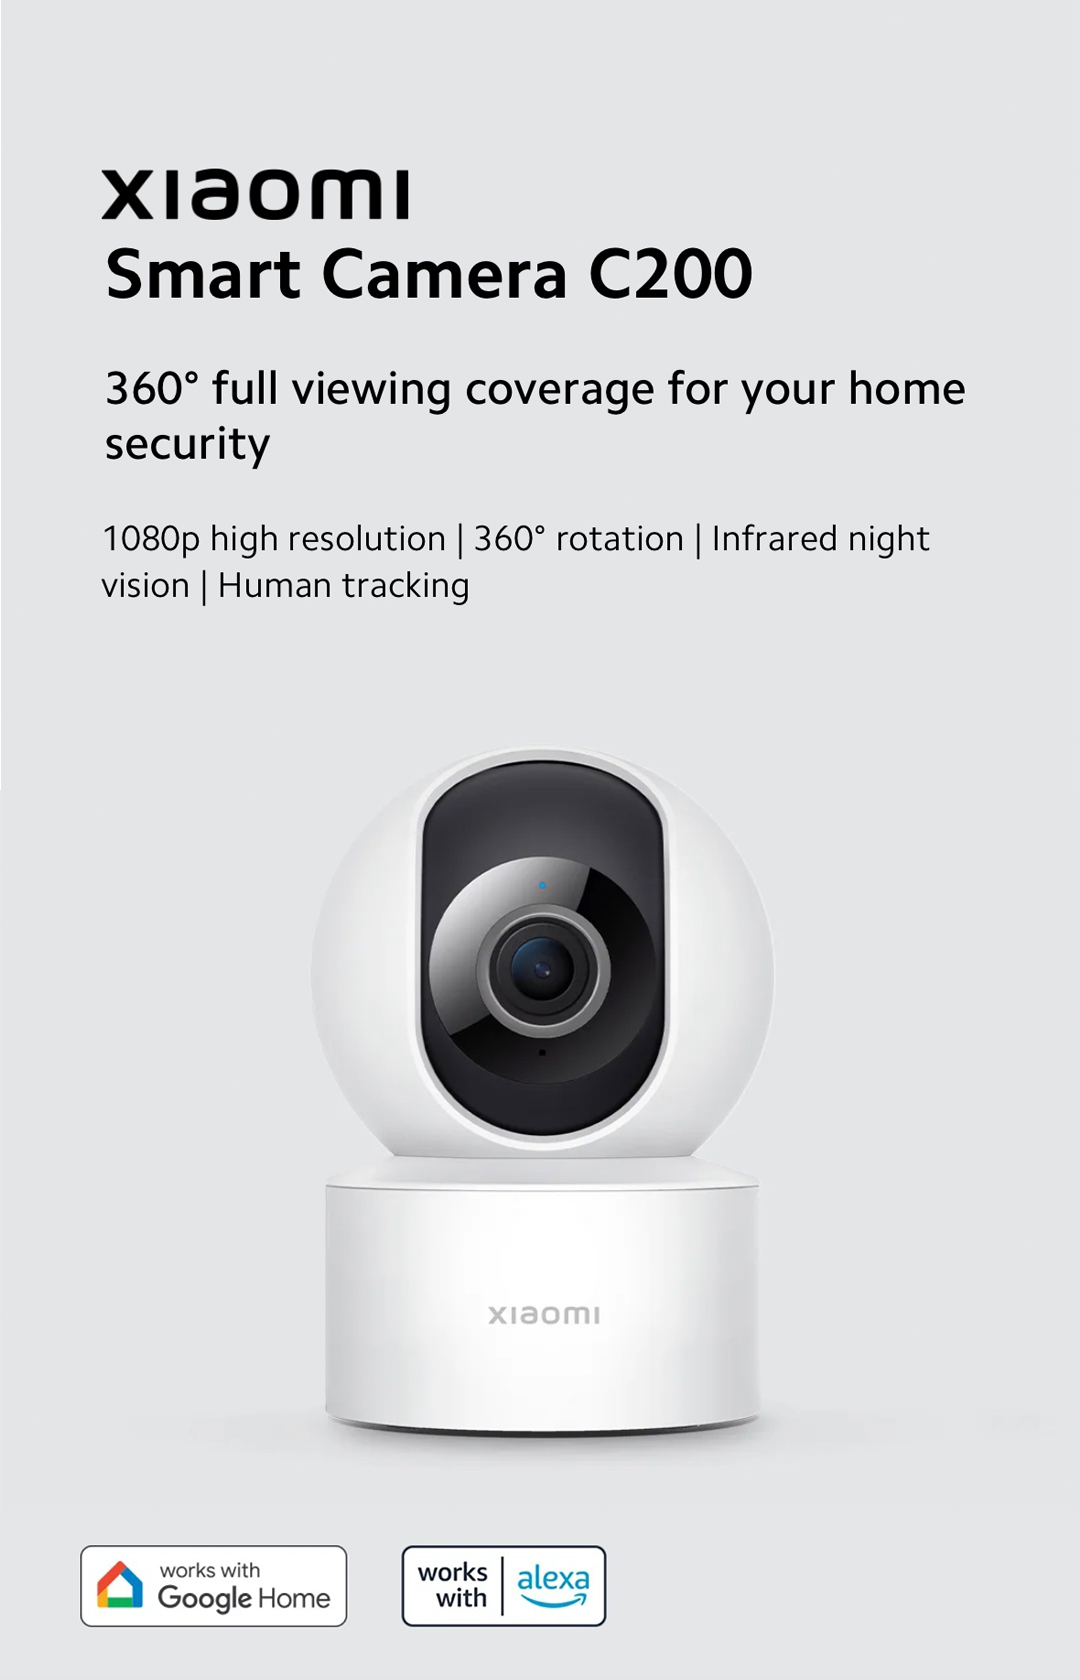 Xiaomi Smart Camera C200 with 360° view arrives at lower price